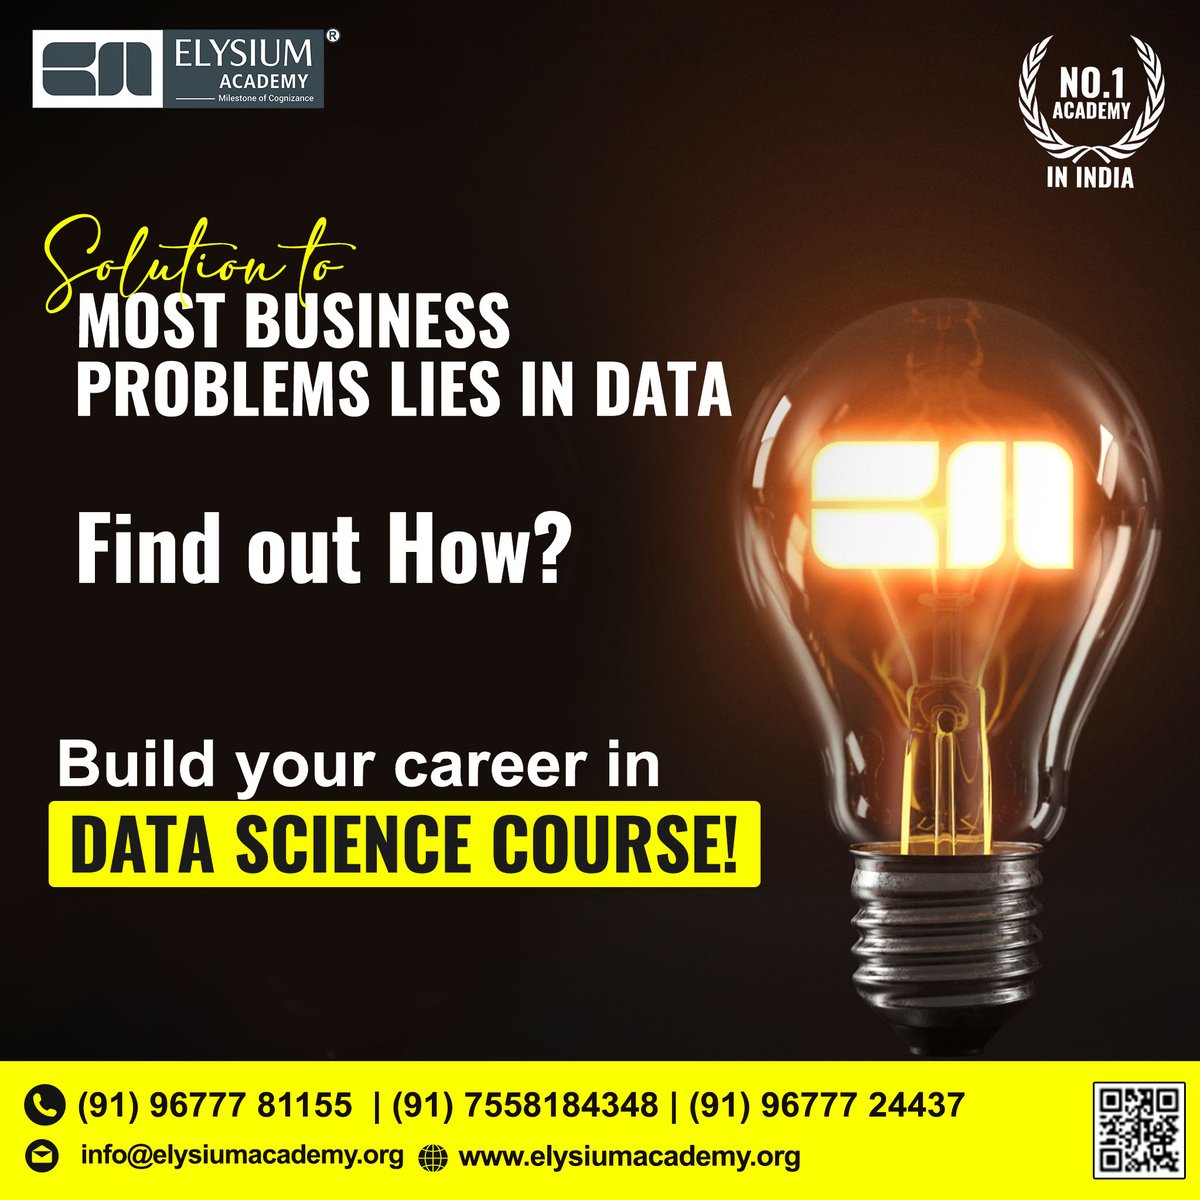 Lightup your business with Data Science courses!📊
#elysiumacademy #no1academy #tesbocourse #jobassurane #itcareer #it #itjobs #coding #job #technology #freeworkshop #datascience #networksecurity #itprofessional #jobs #software #itcourses #itcertifications #python #Datawithpython